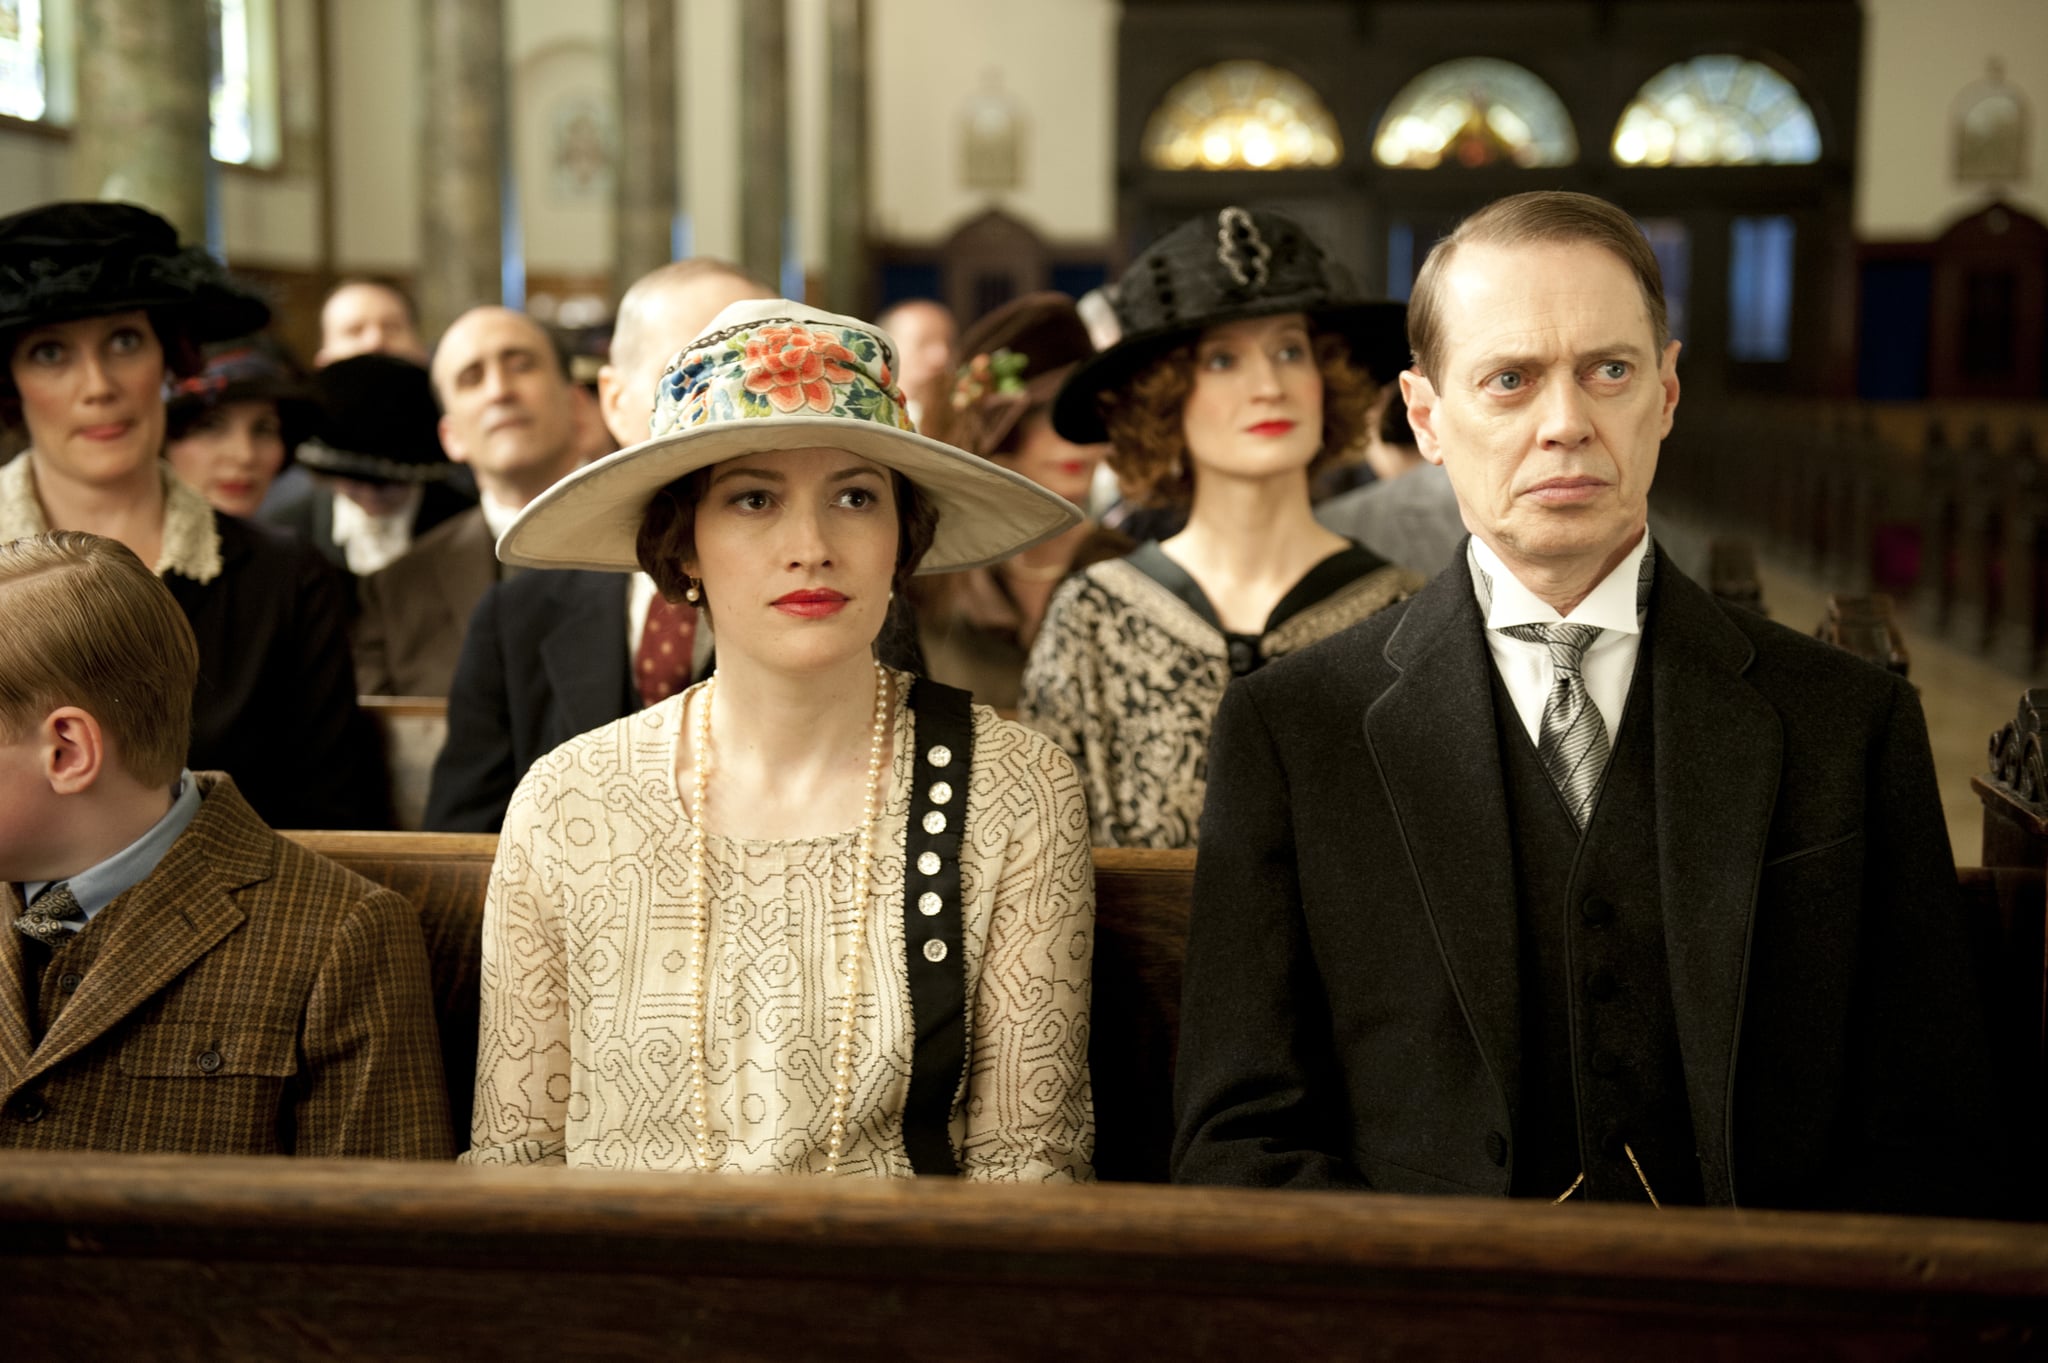 Nucky And Margaret From Boardwalk Empire 45 Pop Culture Halloween Costume Ideas For Couples